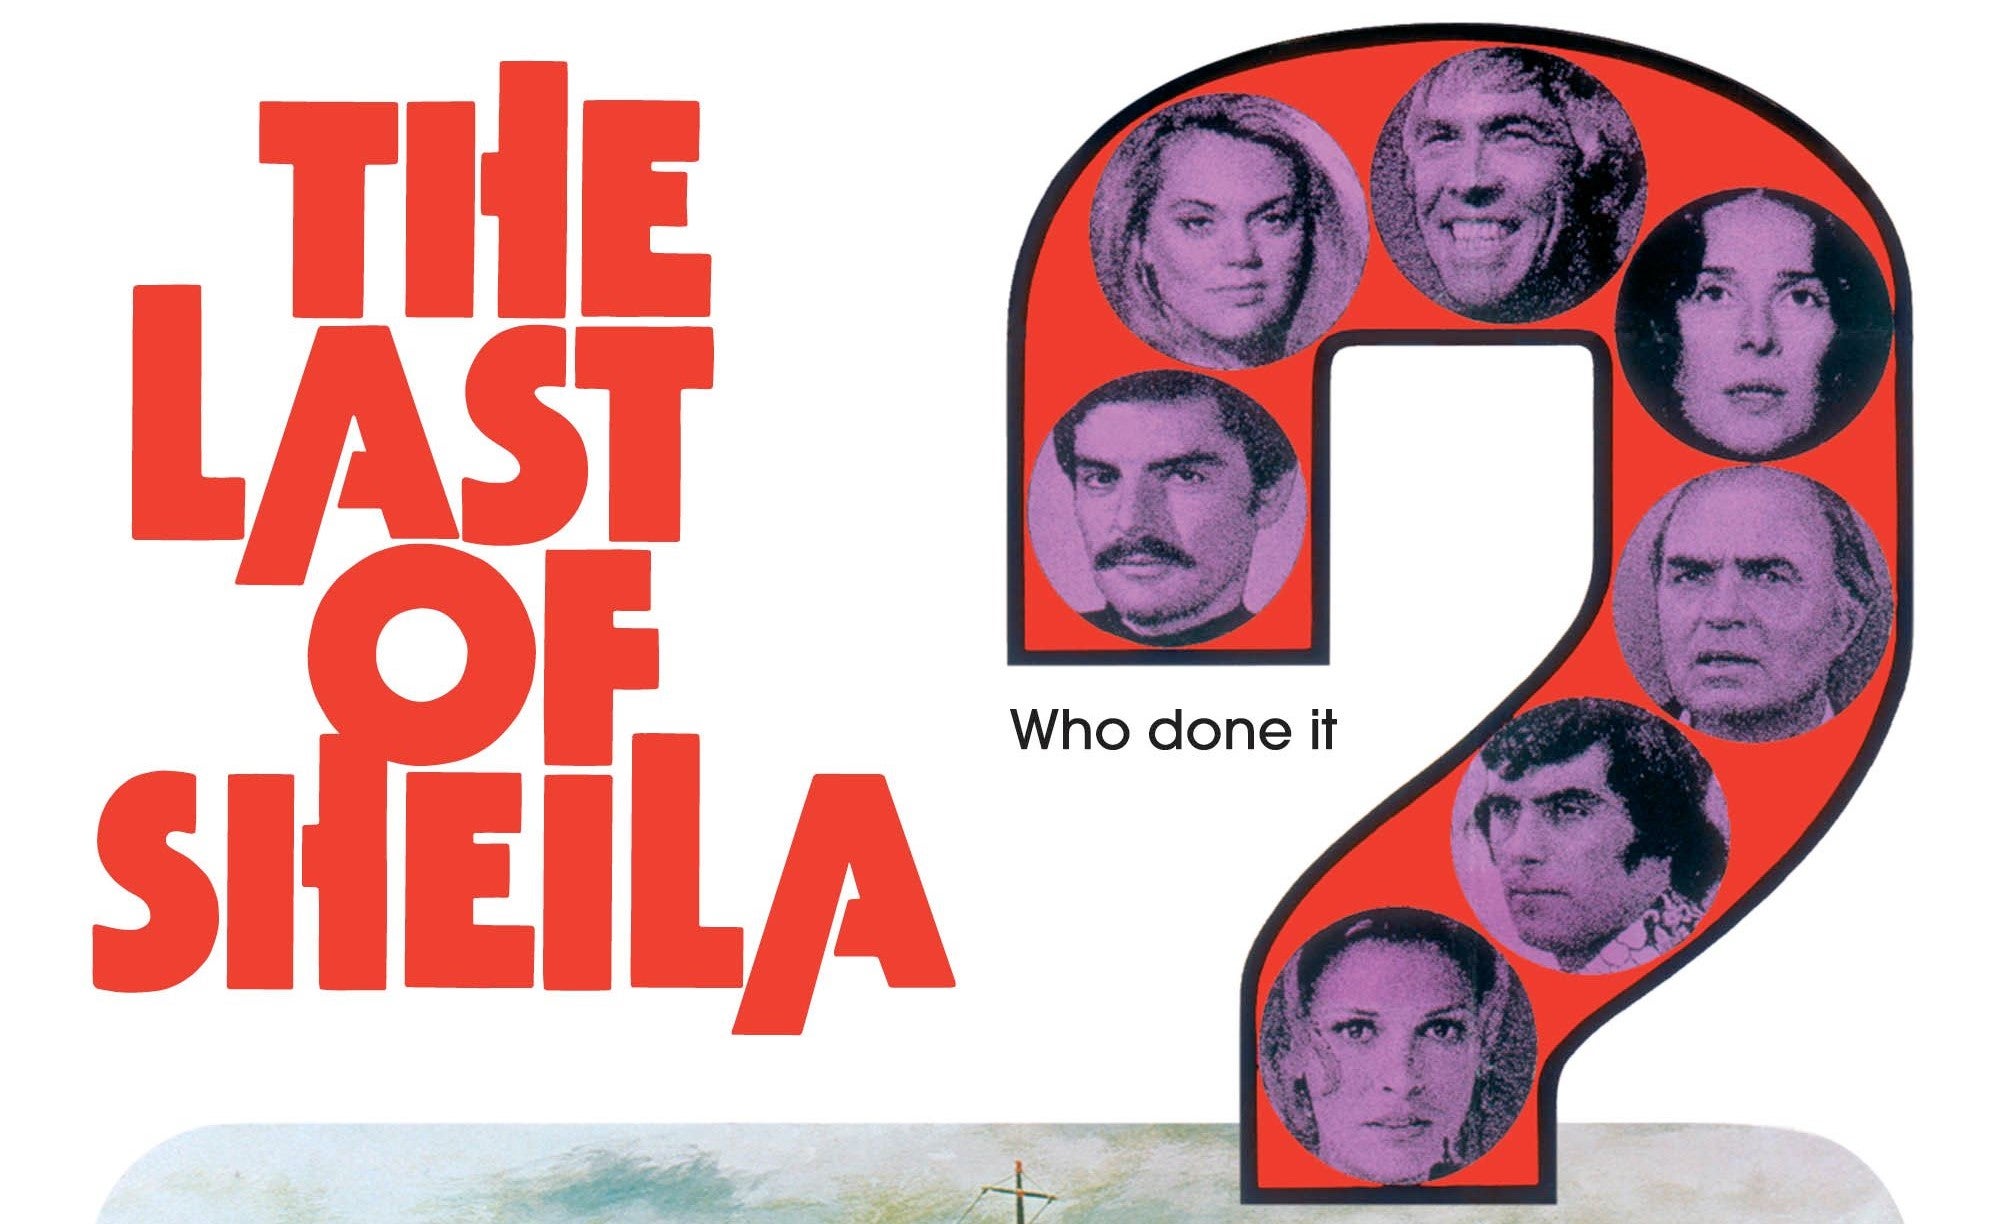 Cropped poster for The Last of Sheila featuring each character image in a question mark